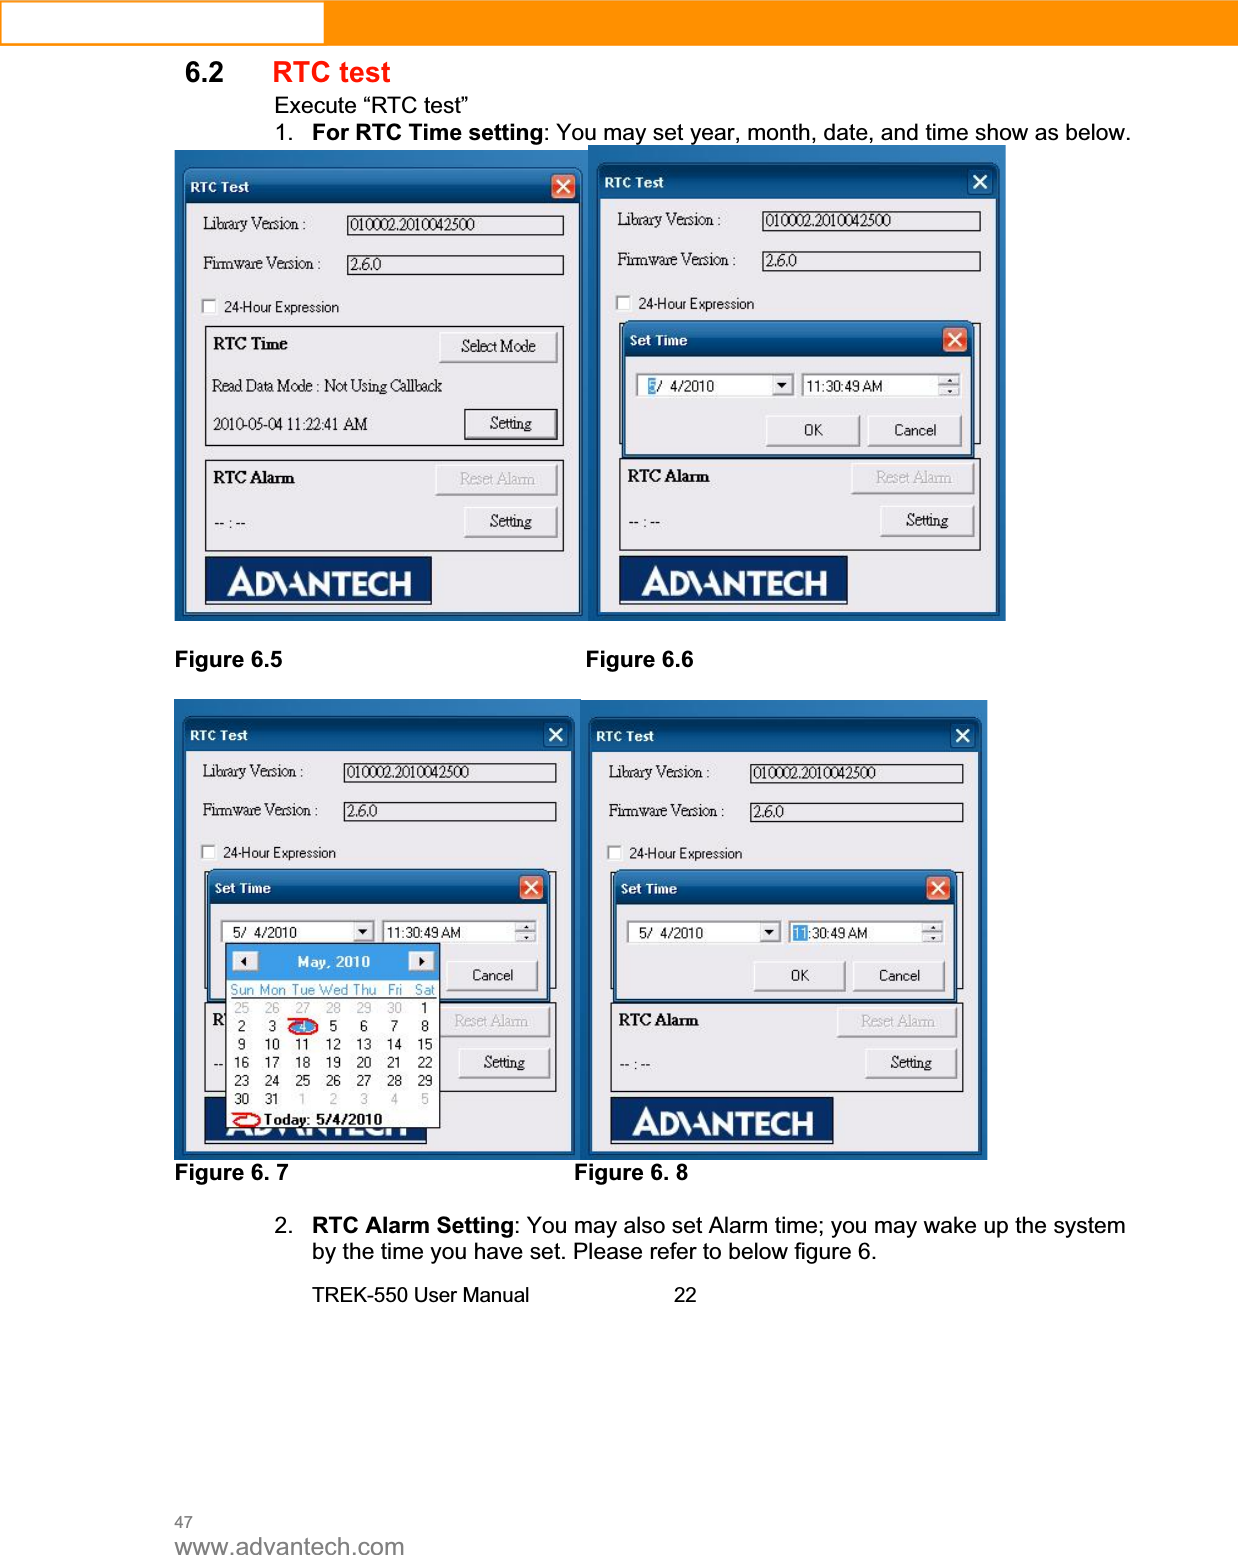 47www.advantech.com6.2RTC testExecute “RTC test”1. For RTC Time setting: You may set year, month, date, and time show as below.   Figure 6.5        Figure 6.6  Figure 6. 7      Figure 6. 8        2. RTC Alarm Setting: You may also set Alarm time; you may wake up the system by the time you have set. Please refer to below figure 6. TREK-550 User Manual 22